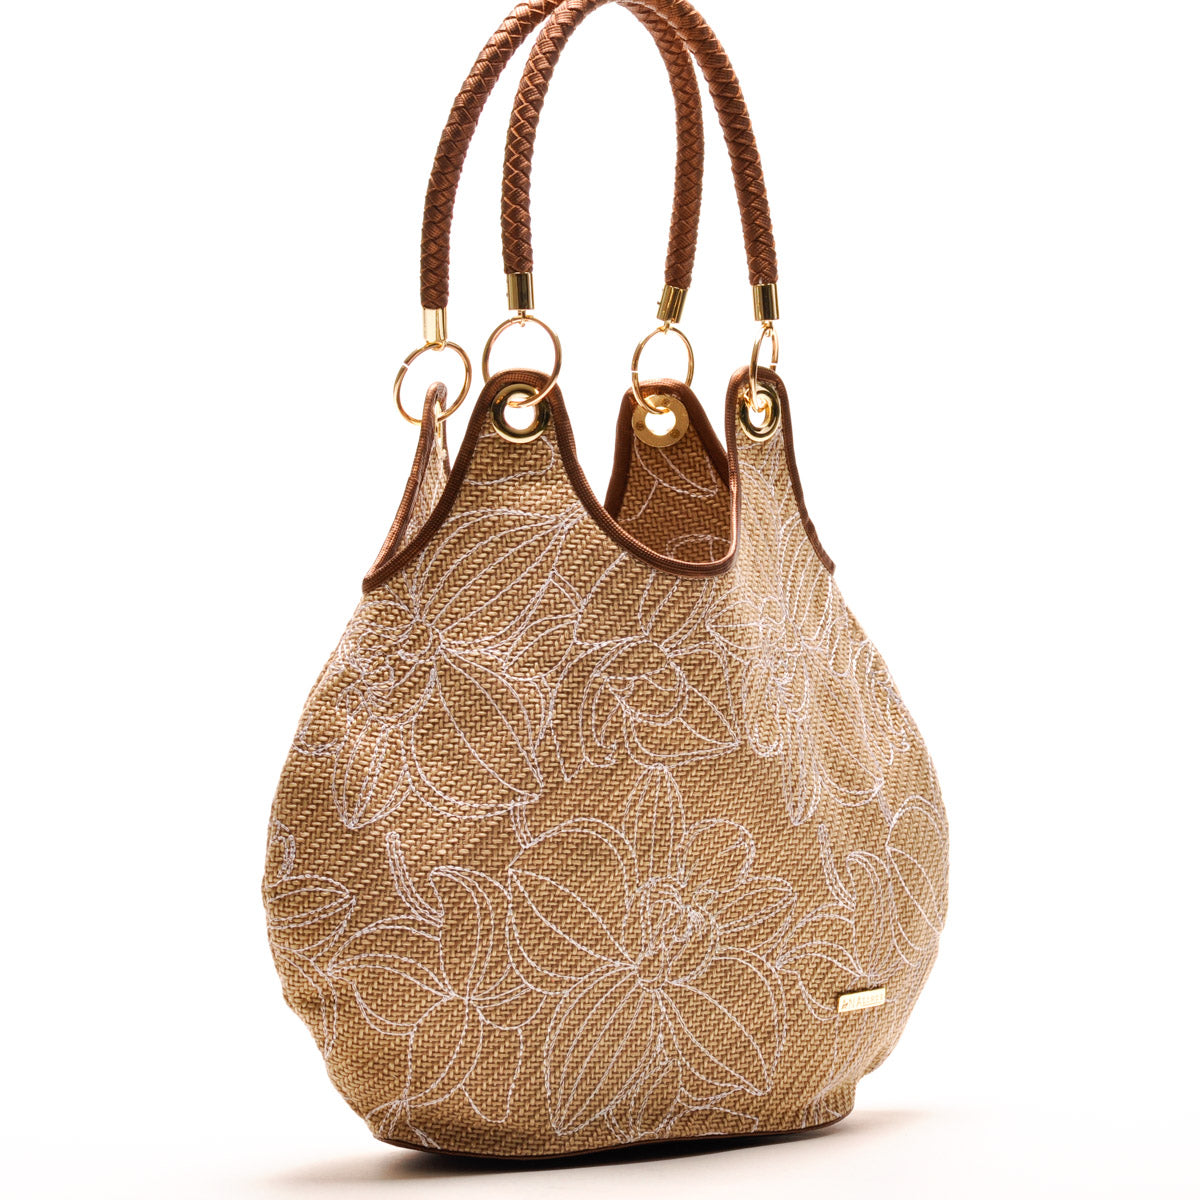 Bolso Round Jute White Flowers - Ana Lince Accesorios - Accesorios para Mujer - Atemporales & Sostenibles